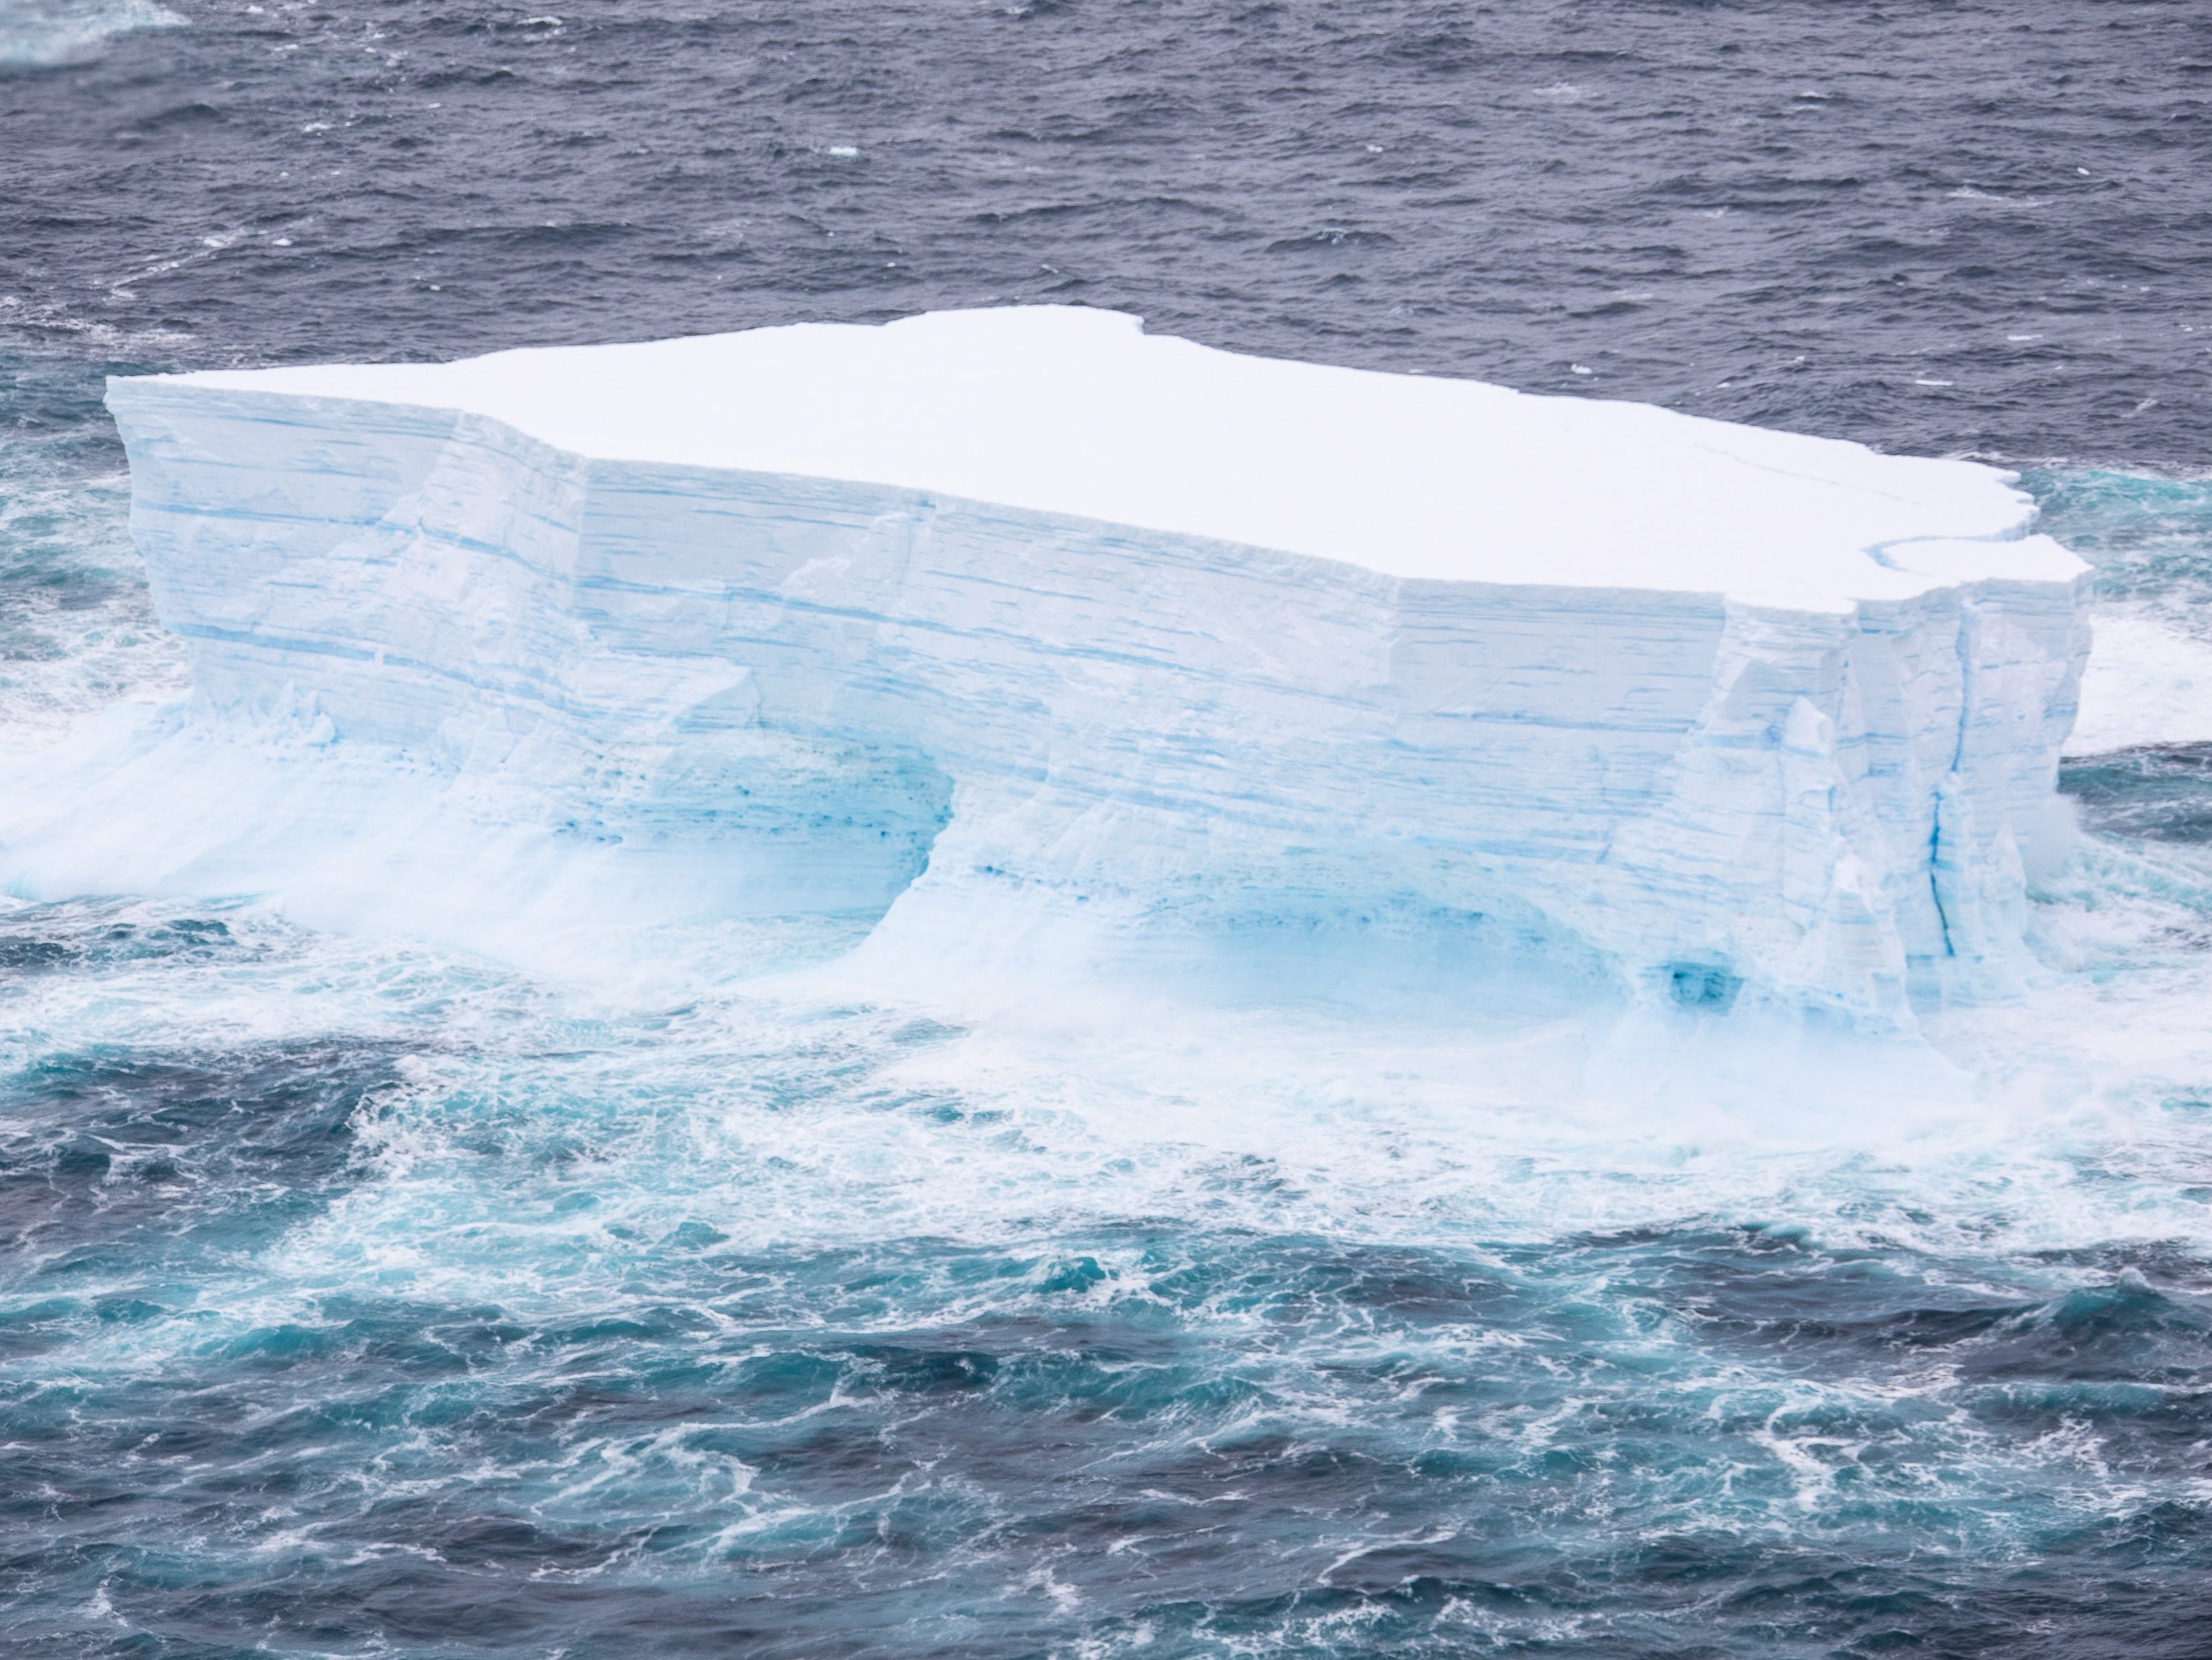 One of the largest icebergs ever recorded was photographed as it floated from Antarctica towards the island of South Georgia